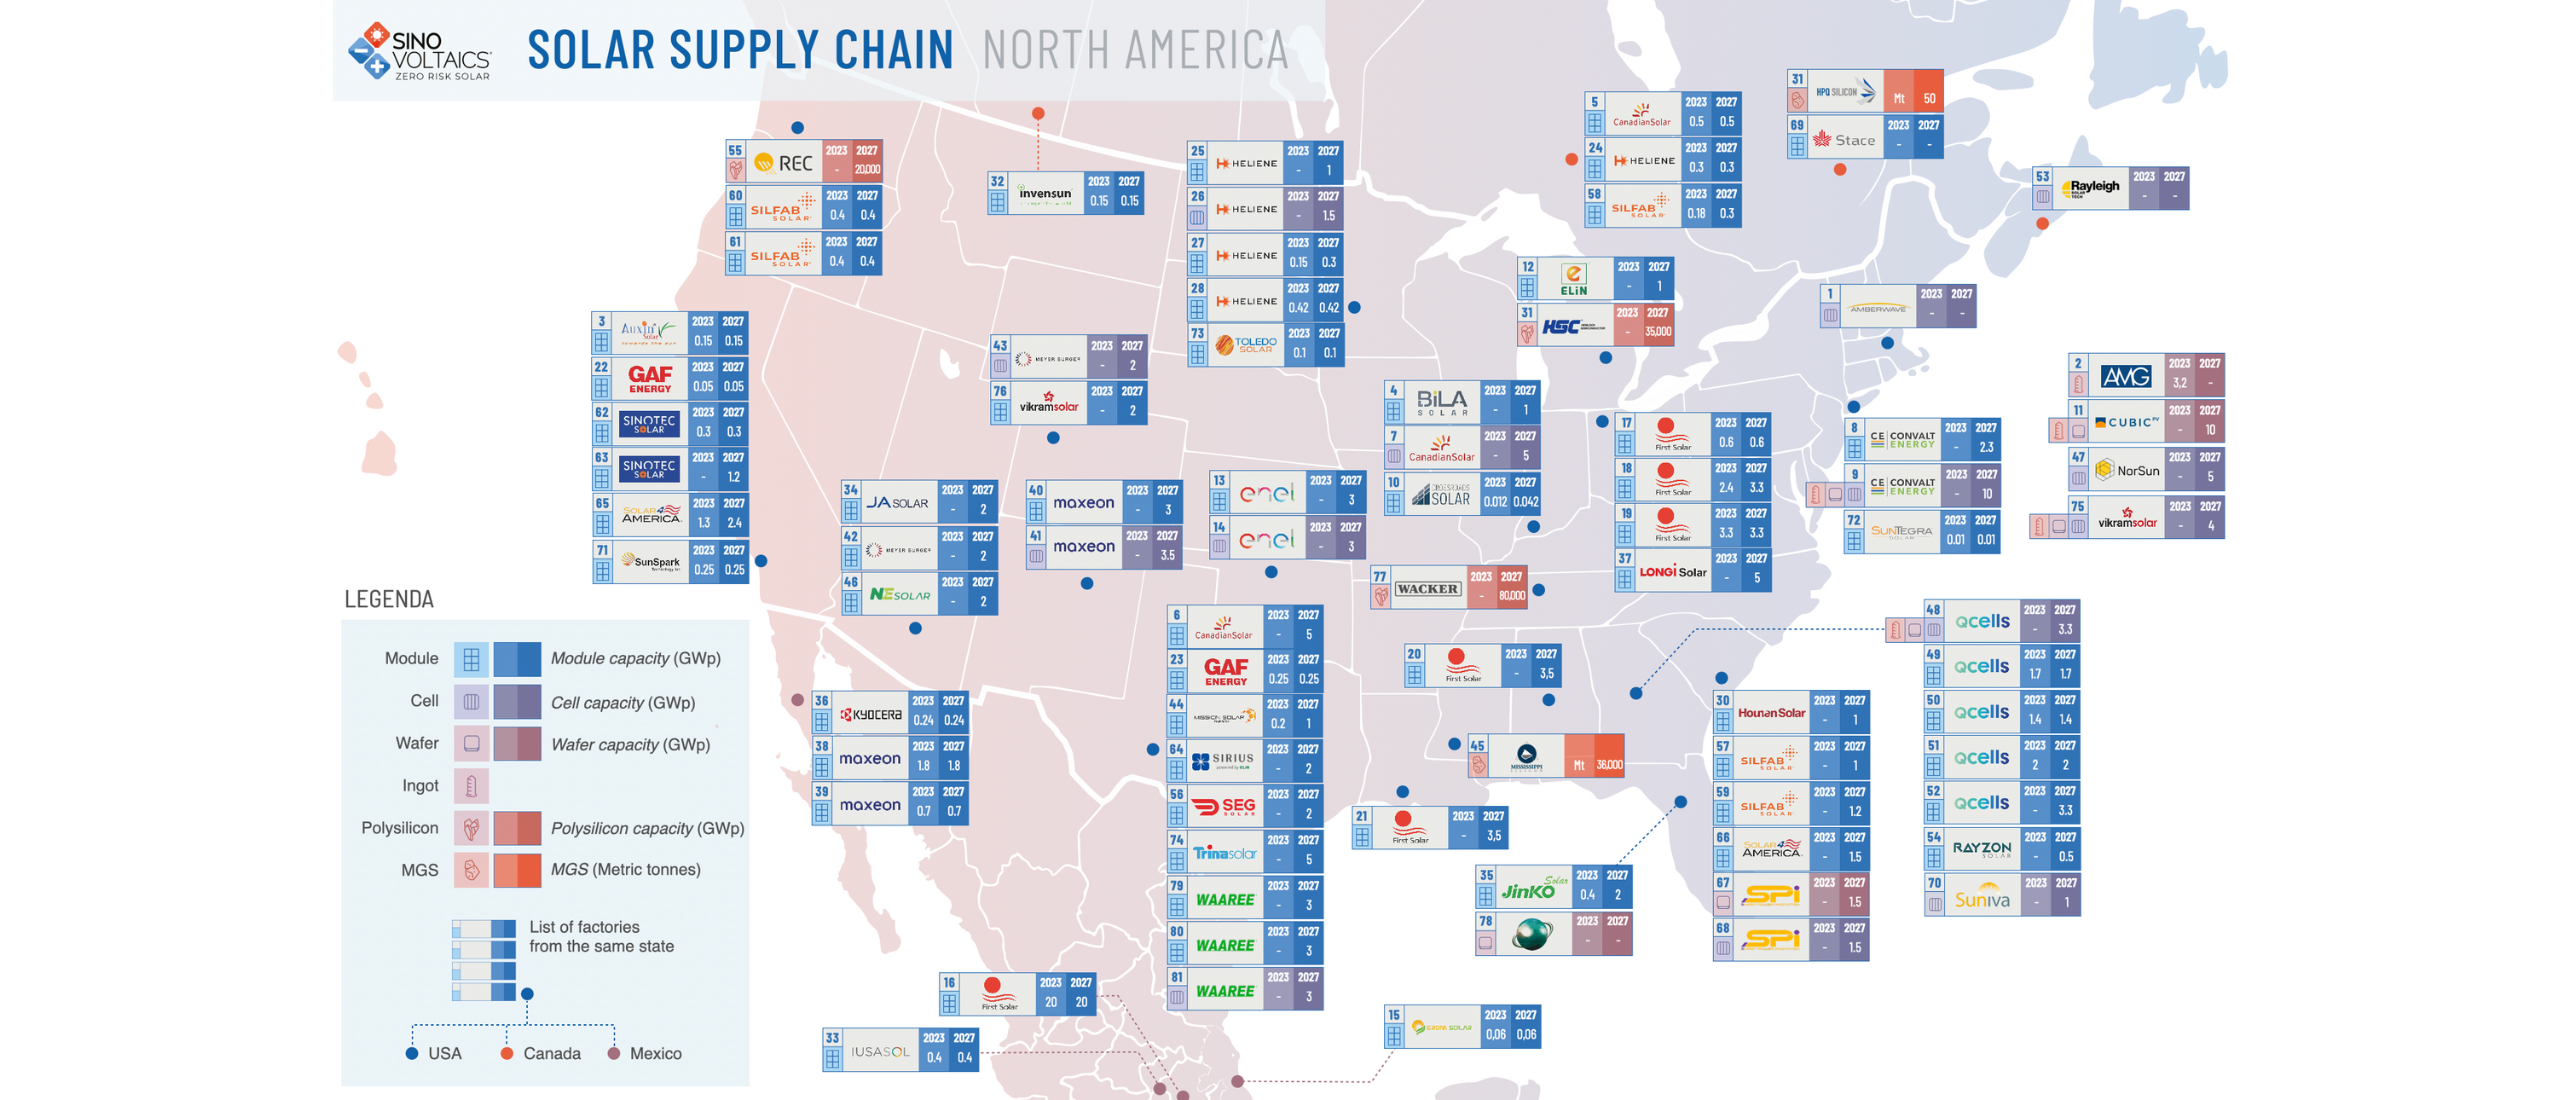 Sinovoltaics Releases Solar Supply Chain Infographic Data Map for North America